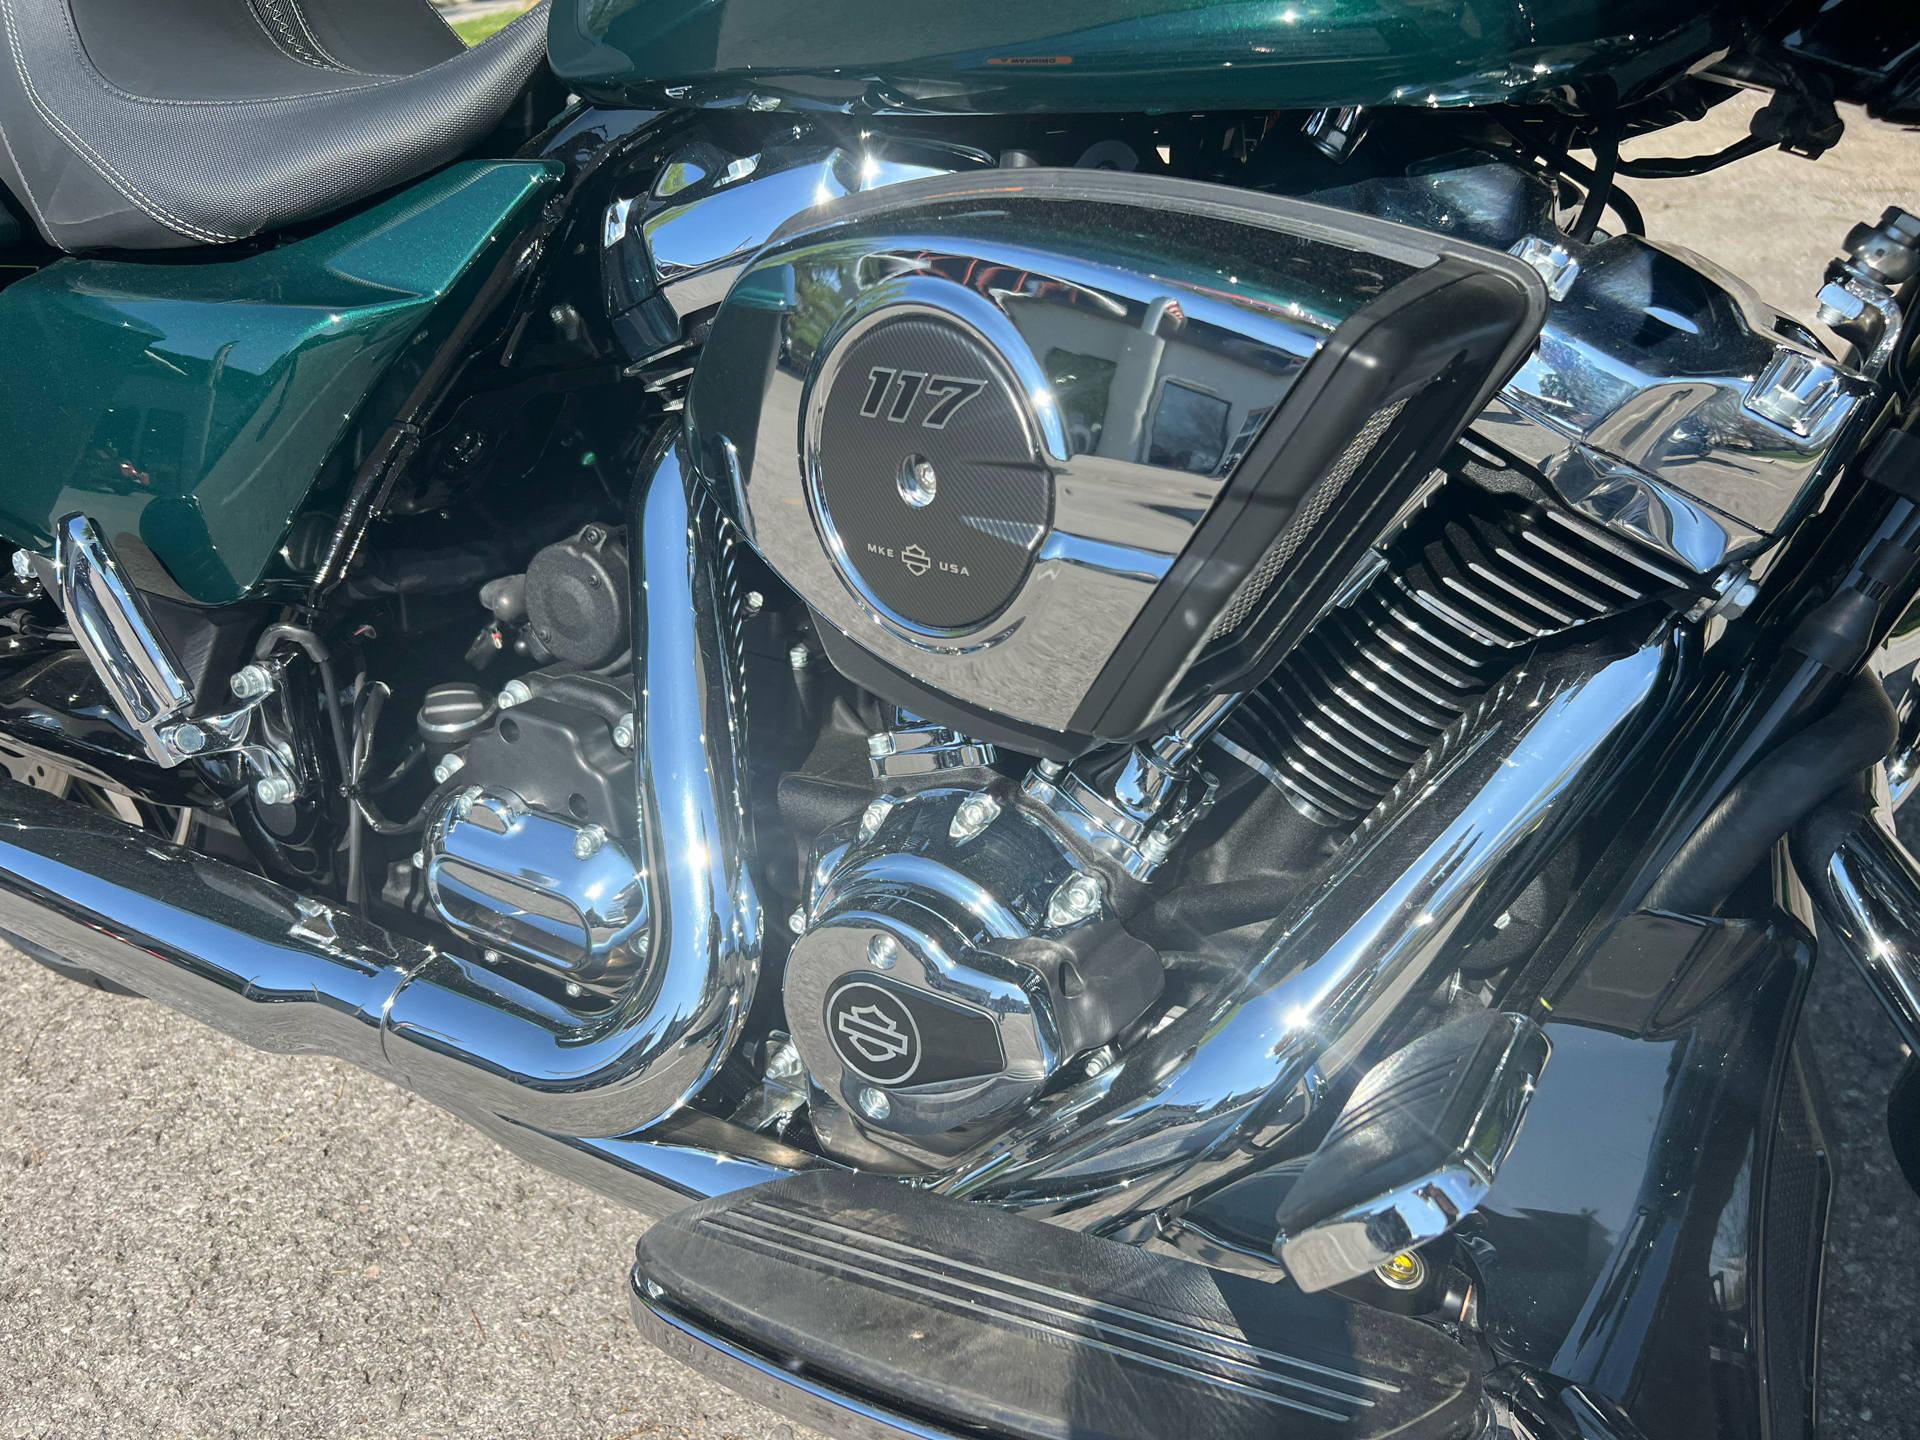 2024 Harley-Davidson Road Glide® in Franklin, Tennessee - Photo 2